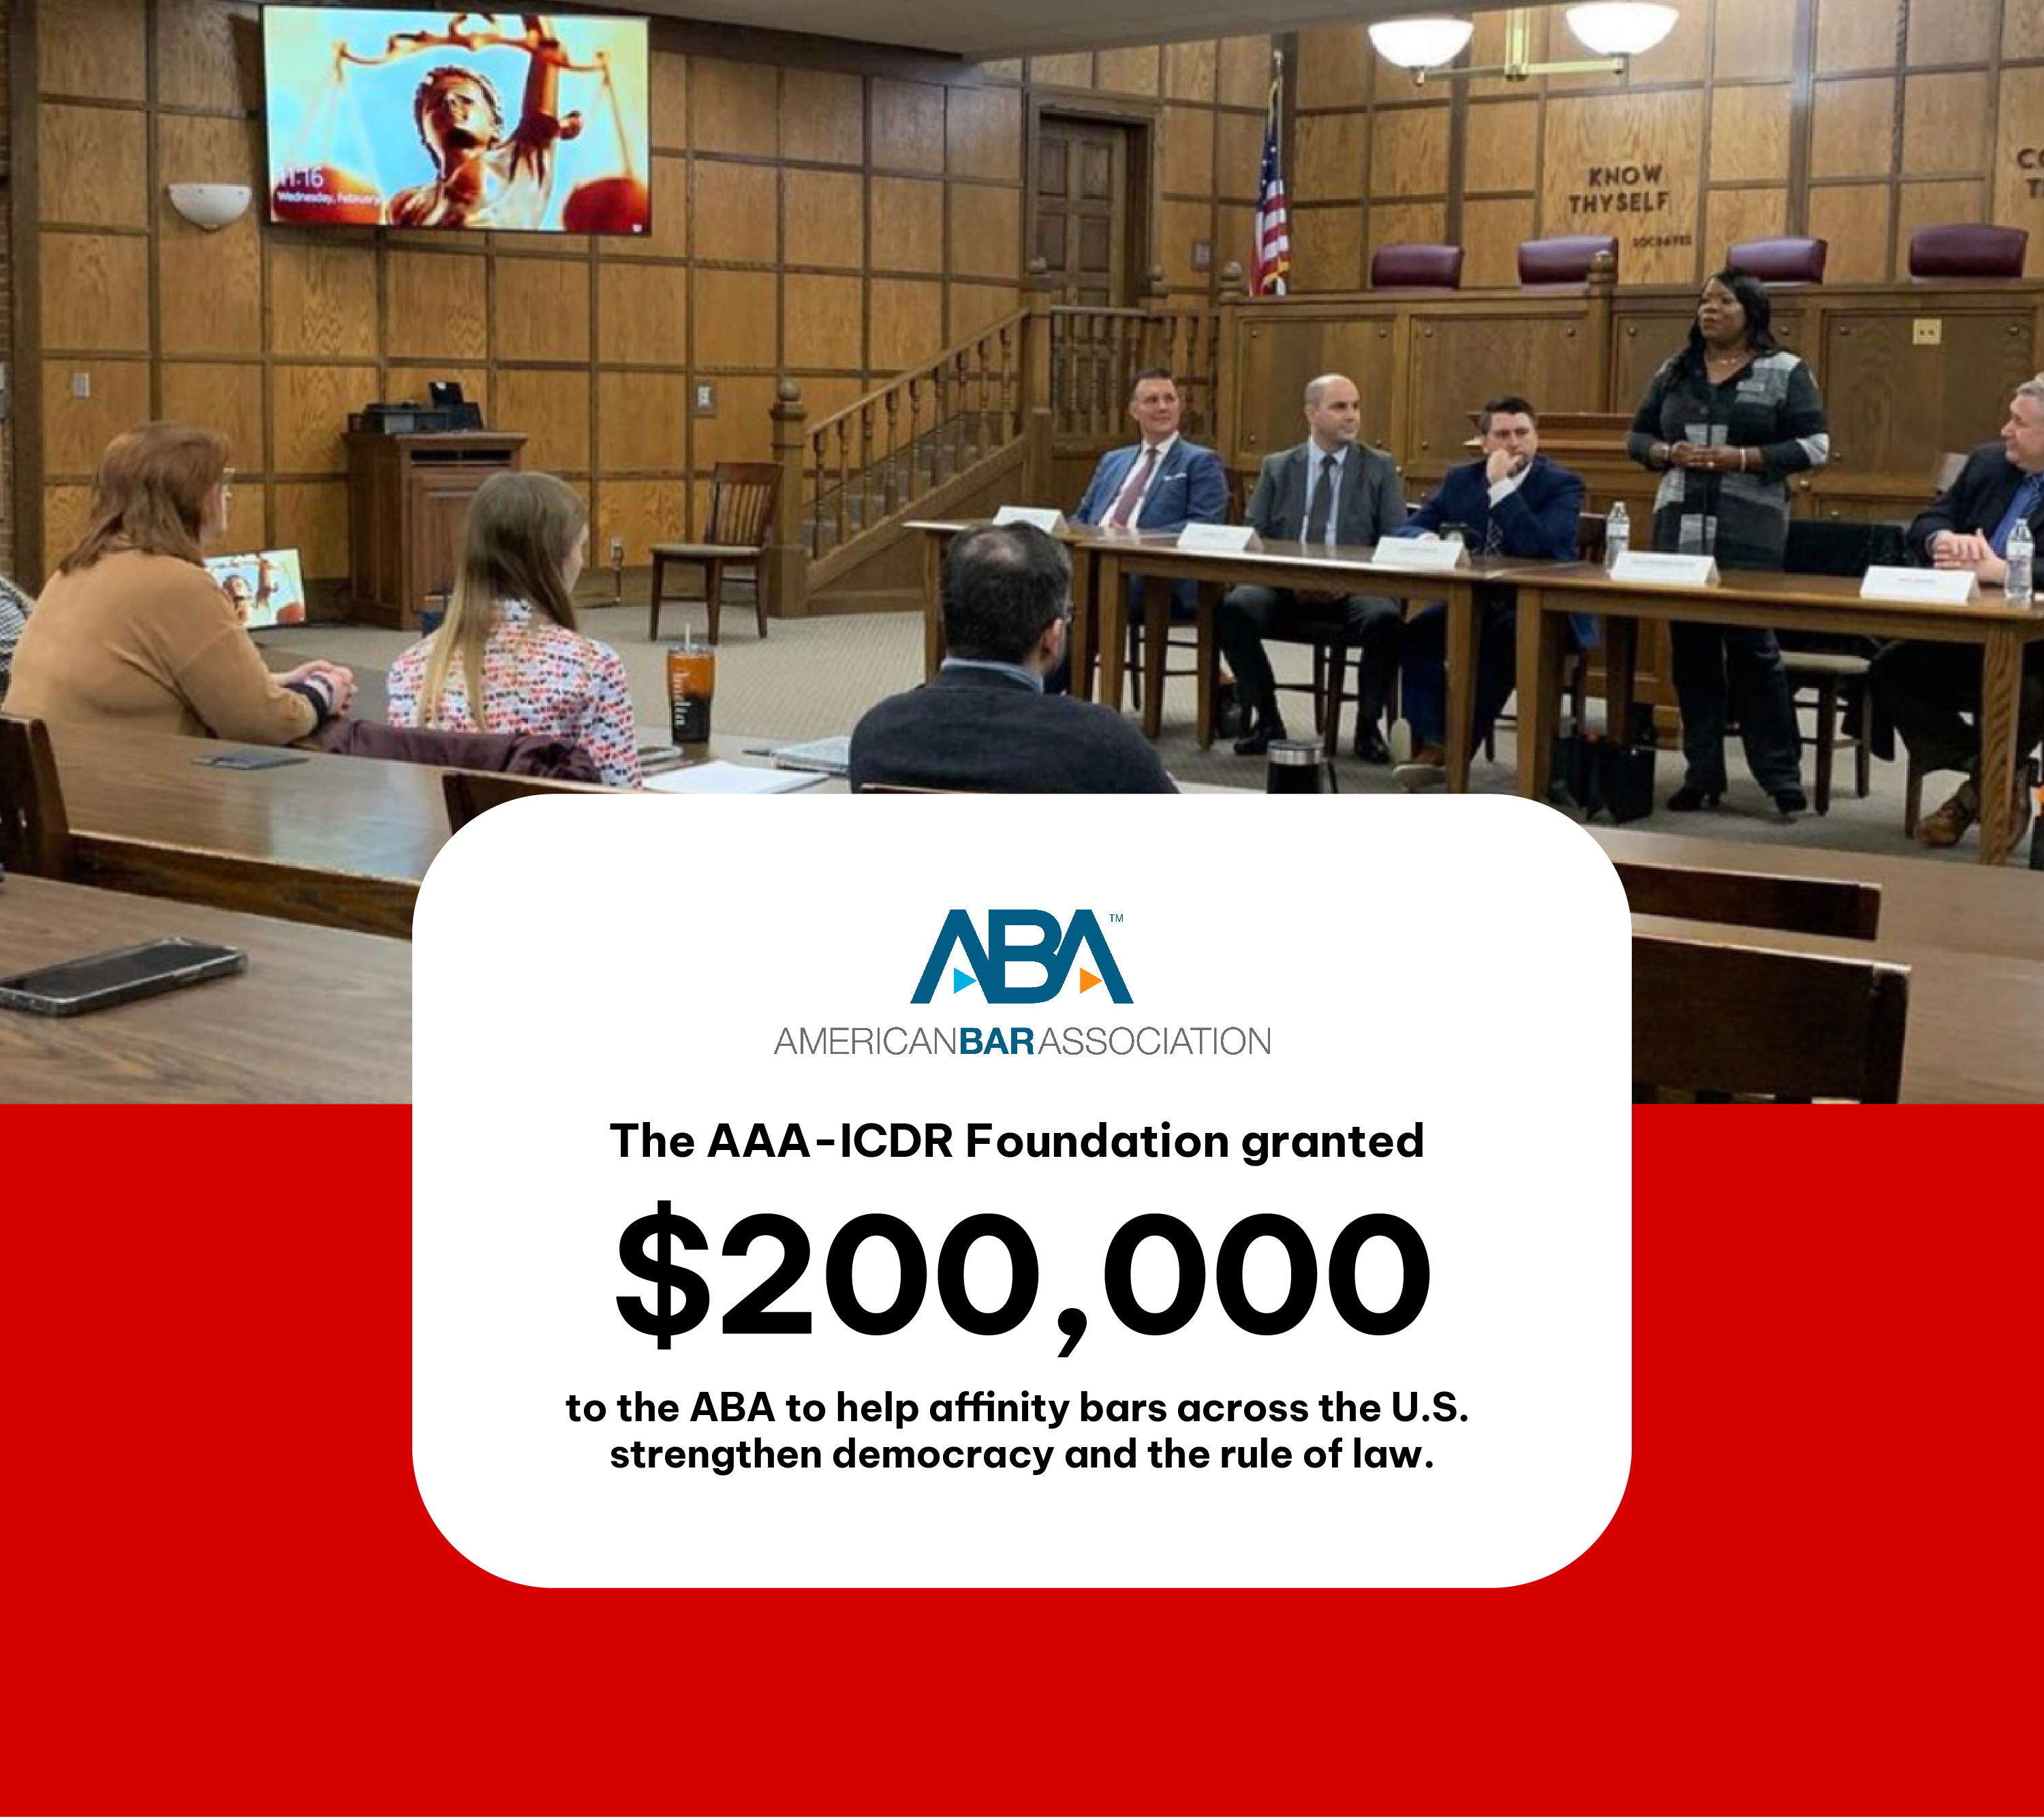 ABA distributes grant money to help promote civics and civility, strengthen the rule of law